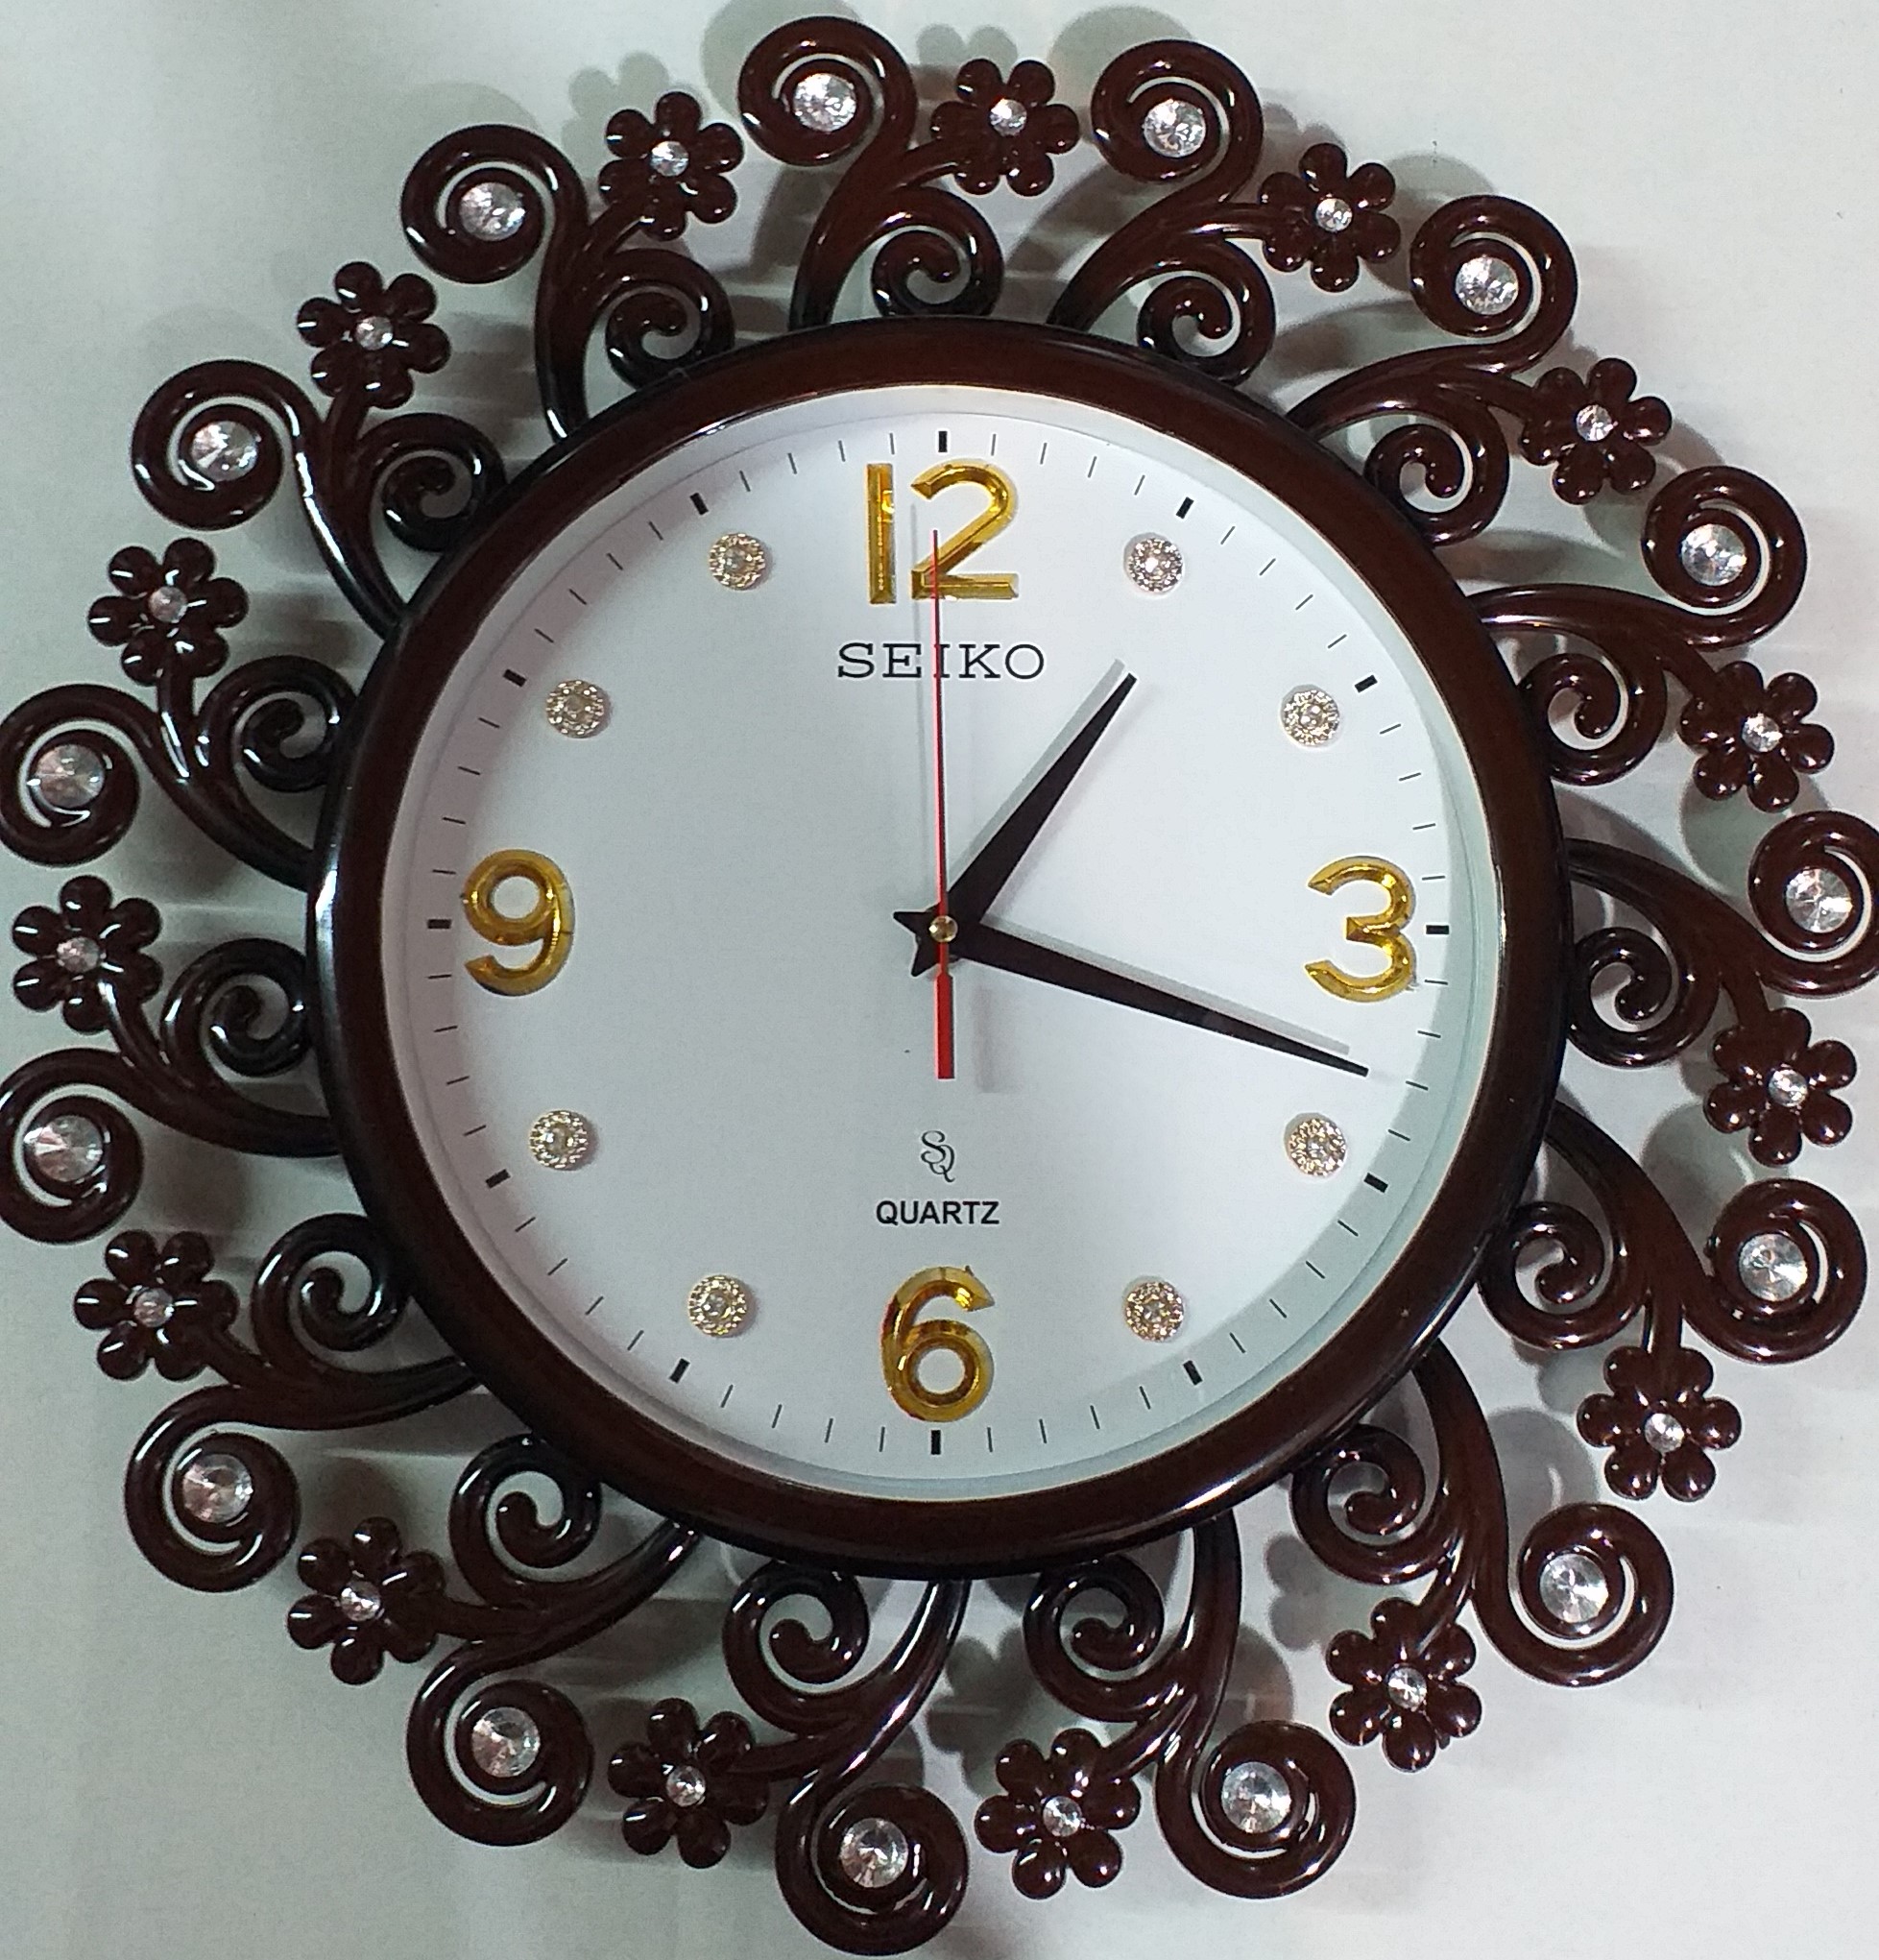 Seiko Stylish Wall Clock: Buy Online at Best Prices in Bangladesh |  